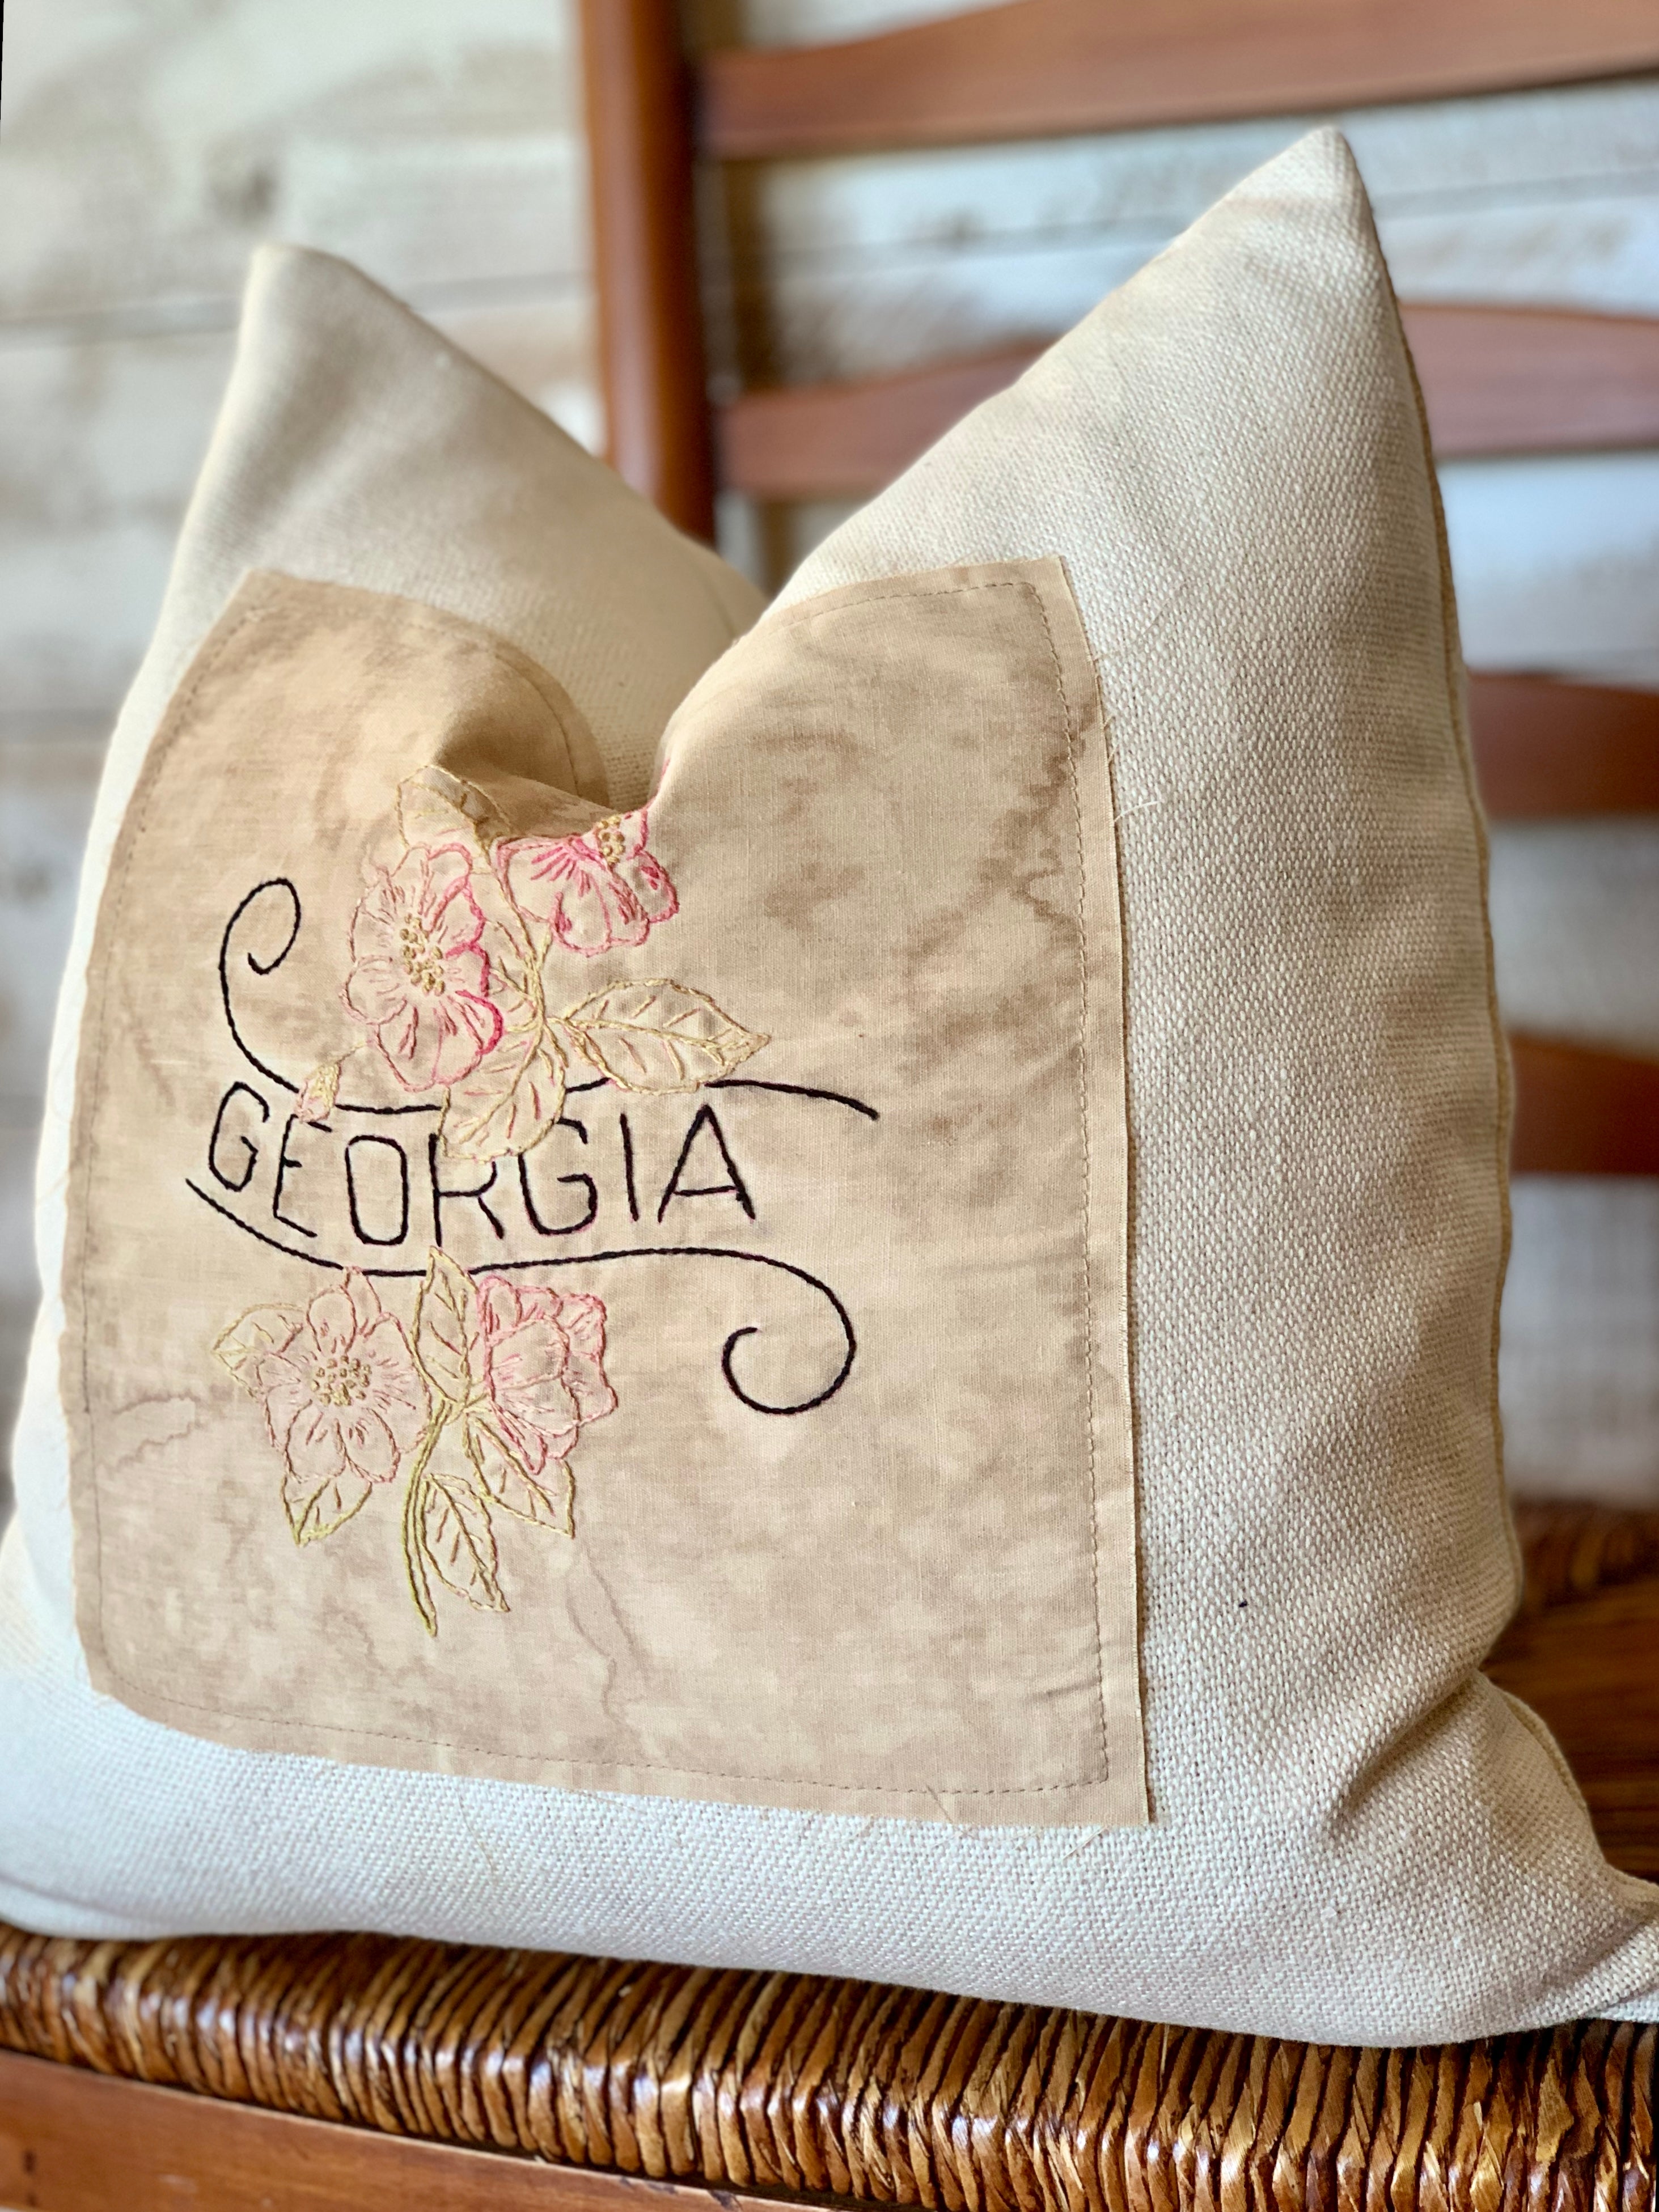 Georgia State Pillow - Embroidered